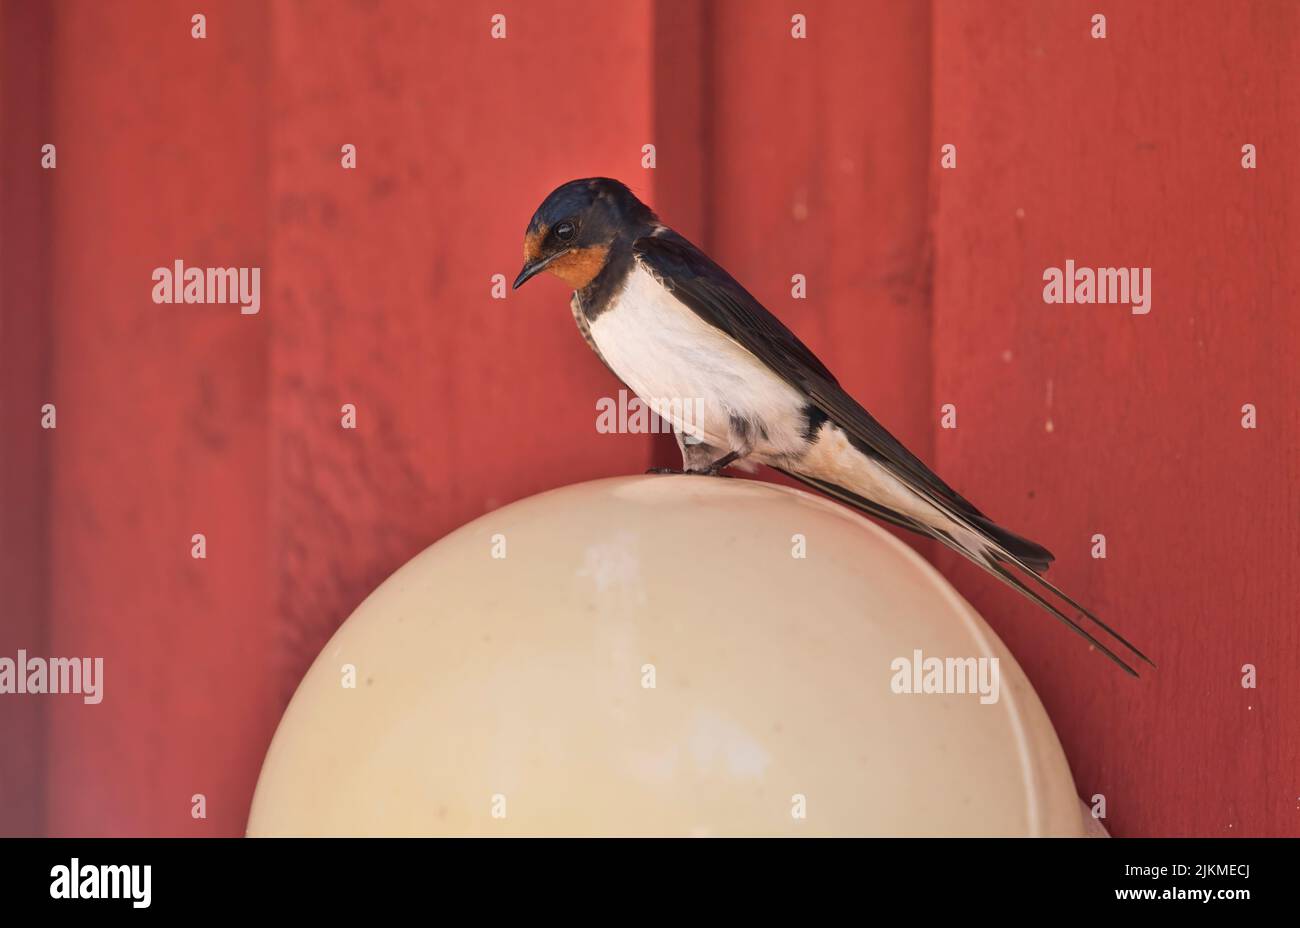 Swallow (Hirundo rustica), making use of an exterior light on a building as a perch Stock Photo